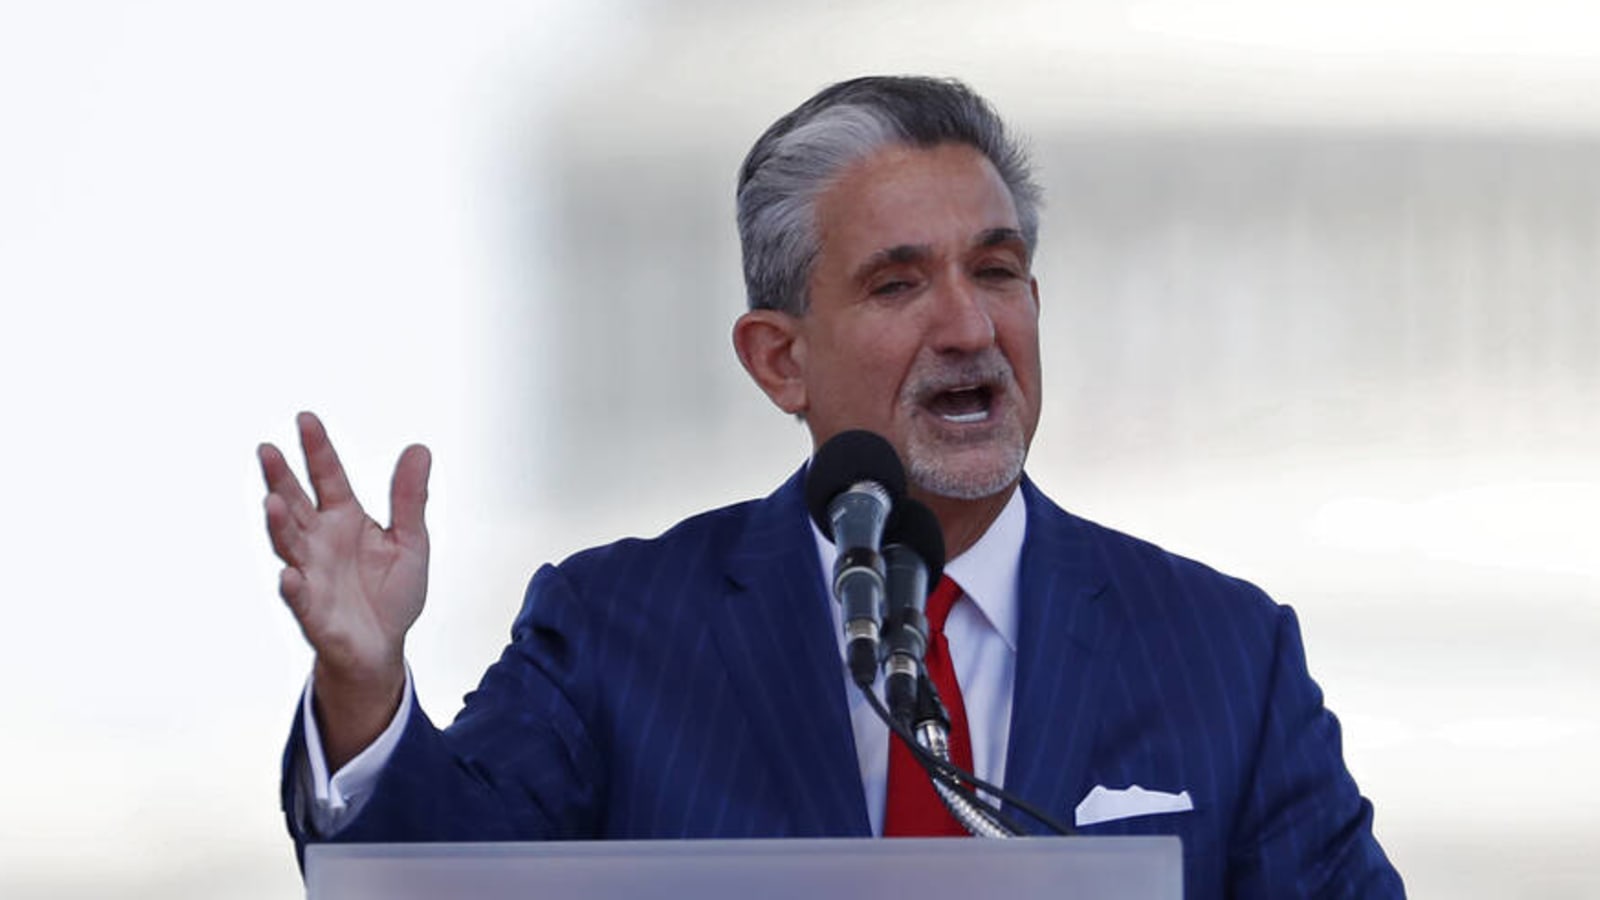 Ted Leonsis emerges as potential suitor for Nationals